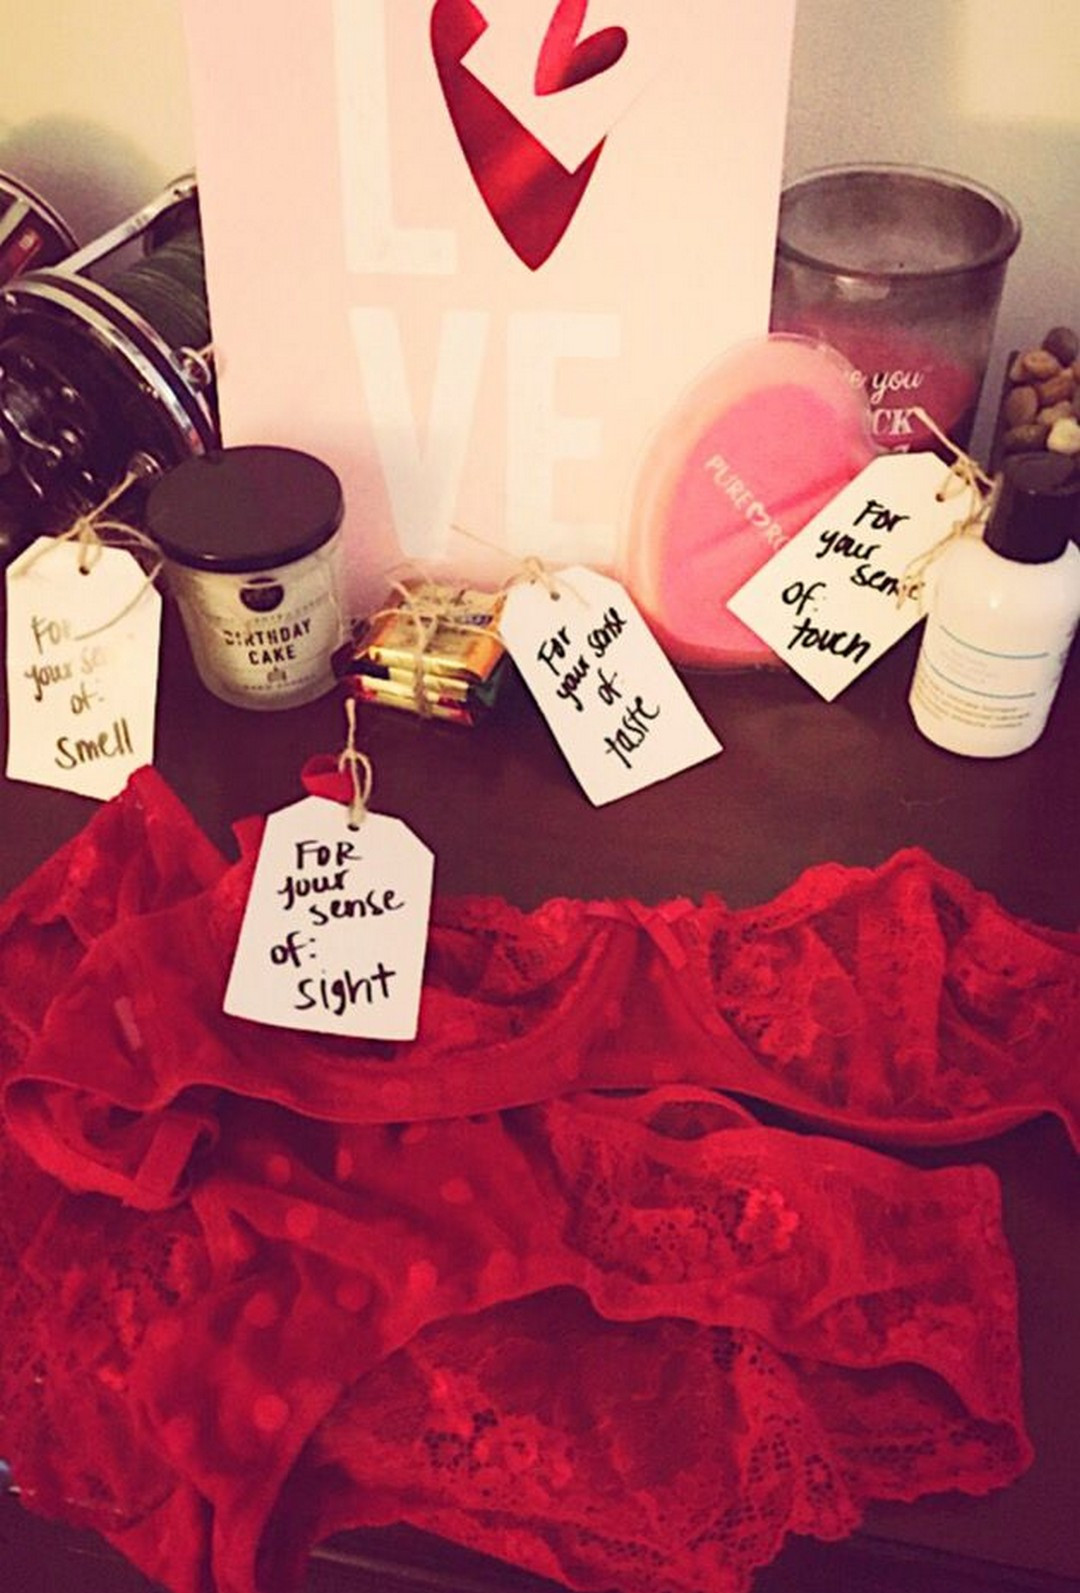 Sexy Valentines Gift Ideas
 Romantic DIY Valentines Day Gifts For Your Boyfriend